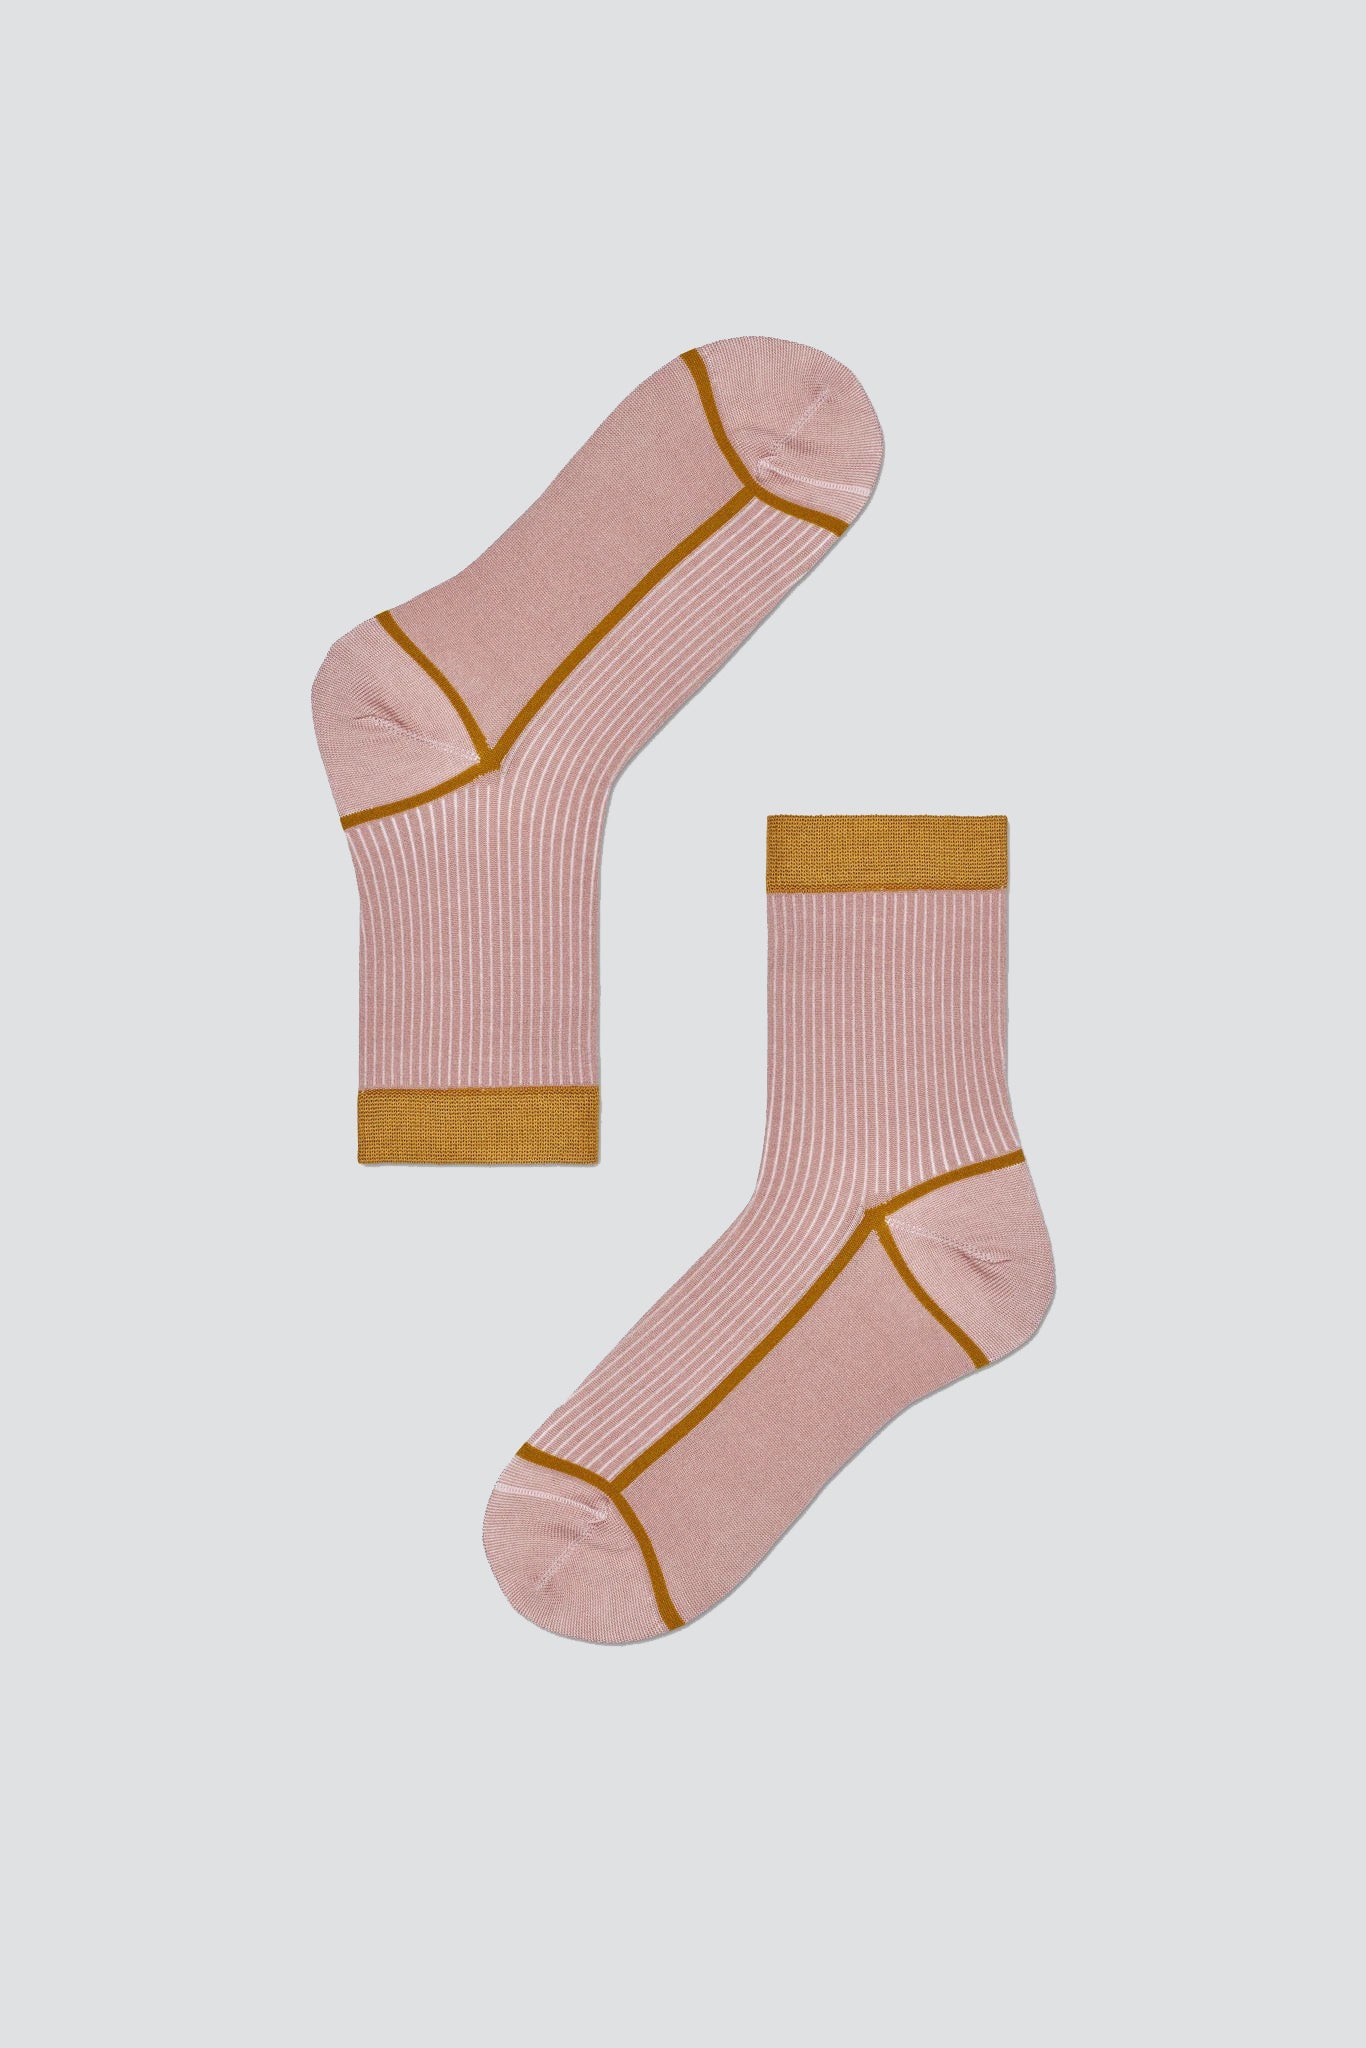 Lily Ankle Sock - Light Pink